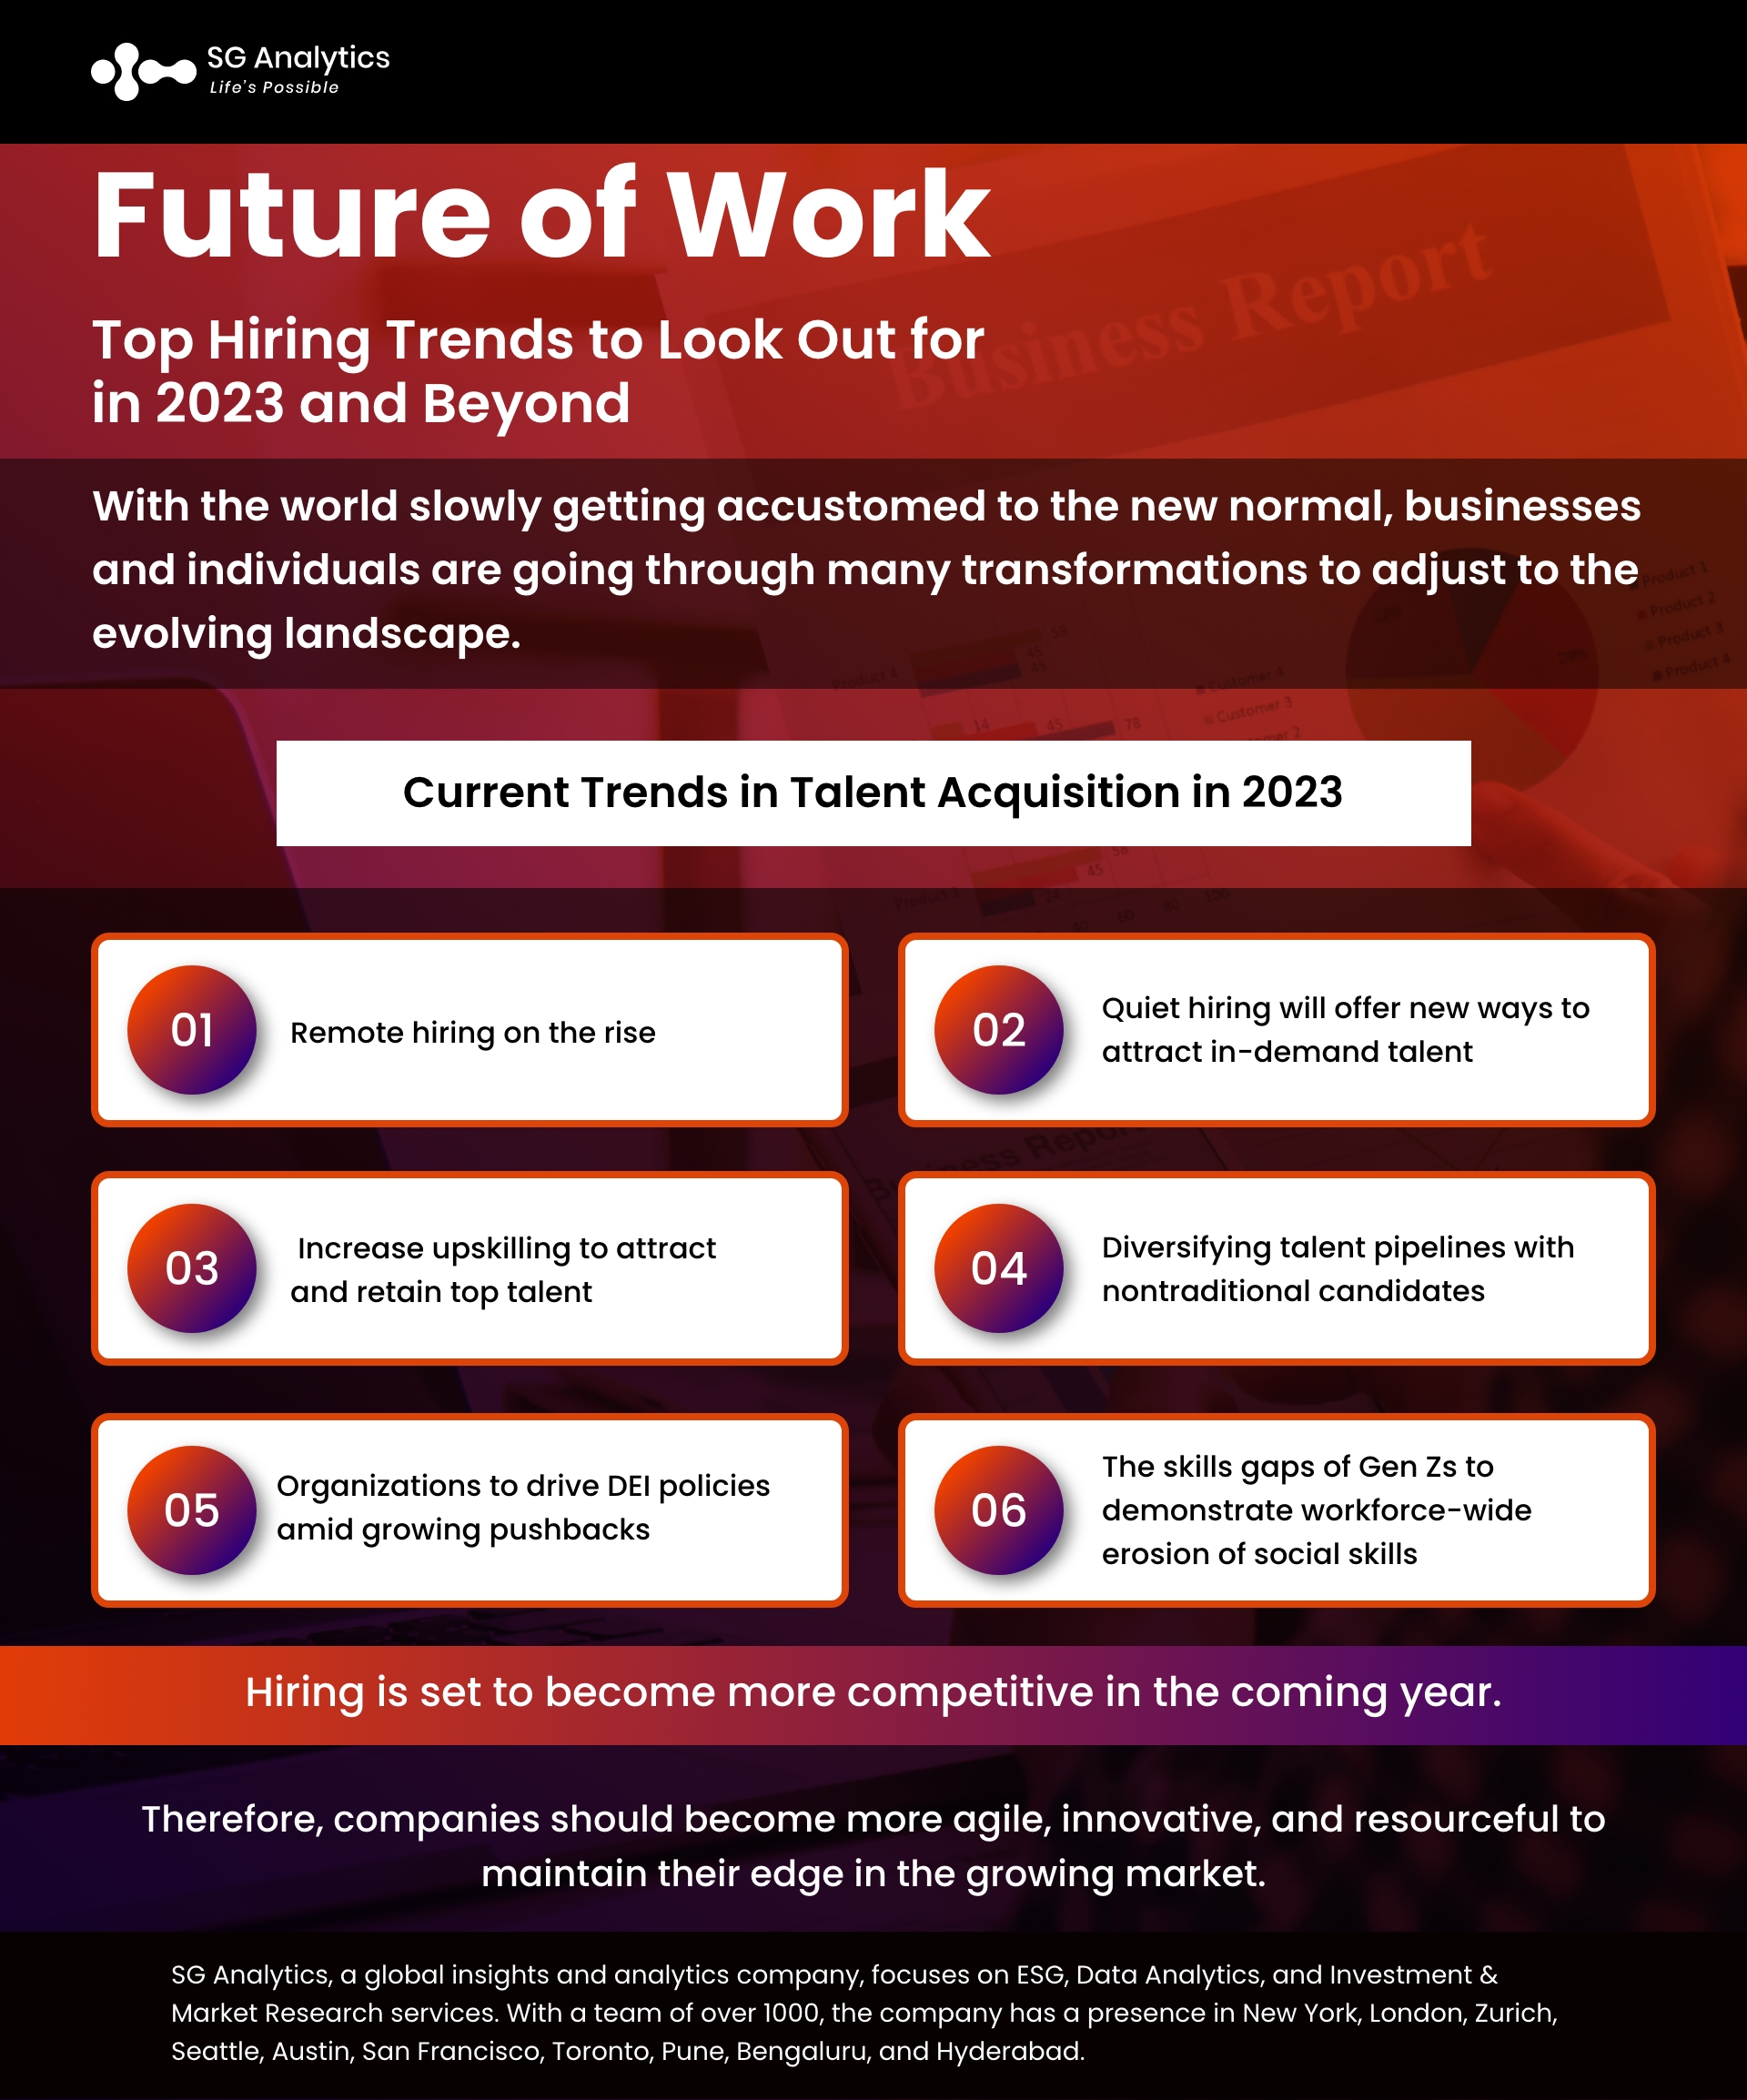 Future of Work: Top Hiring Trends to Look Out for in 2023 and Beyond 